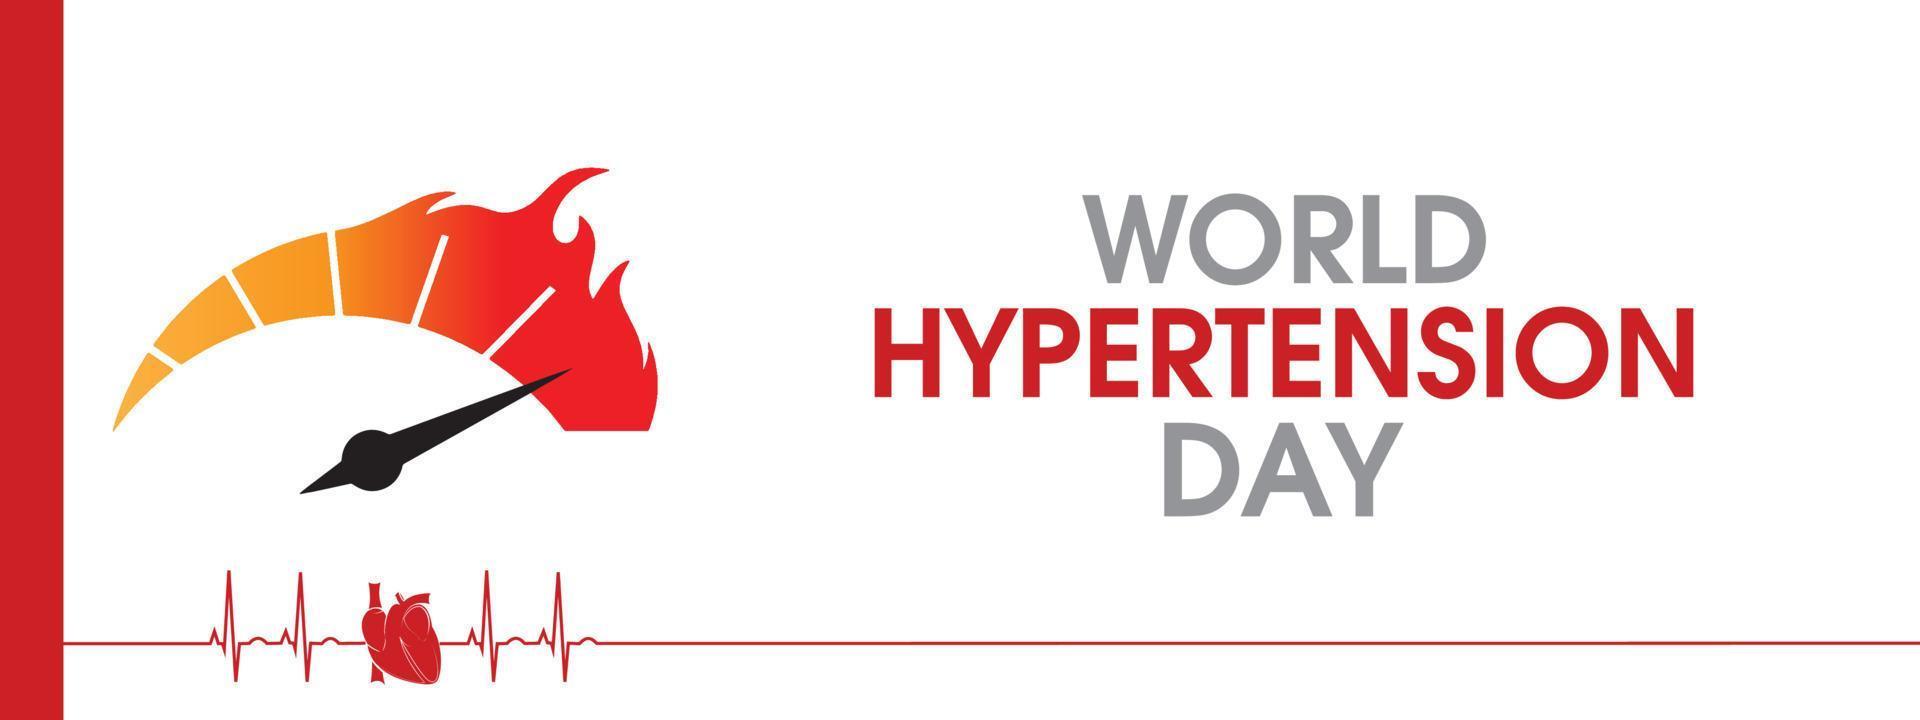 World Hypertension Day Banner design with High meter, Heart Puls, and, text on a white background, 17th May. Hypertension concept. vector illustration.